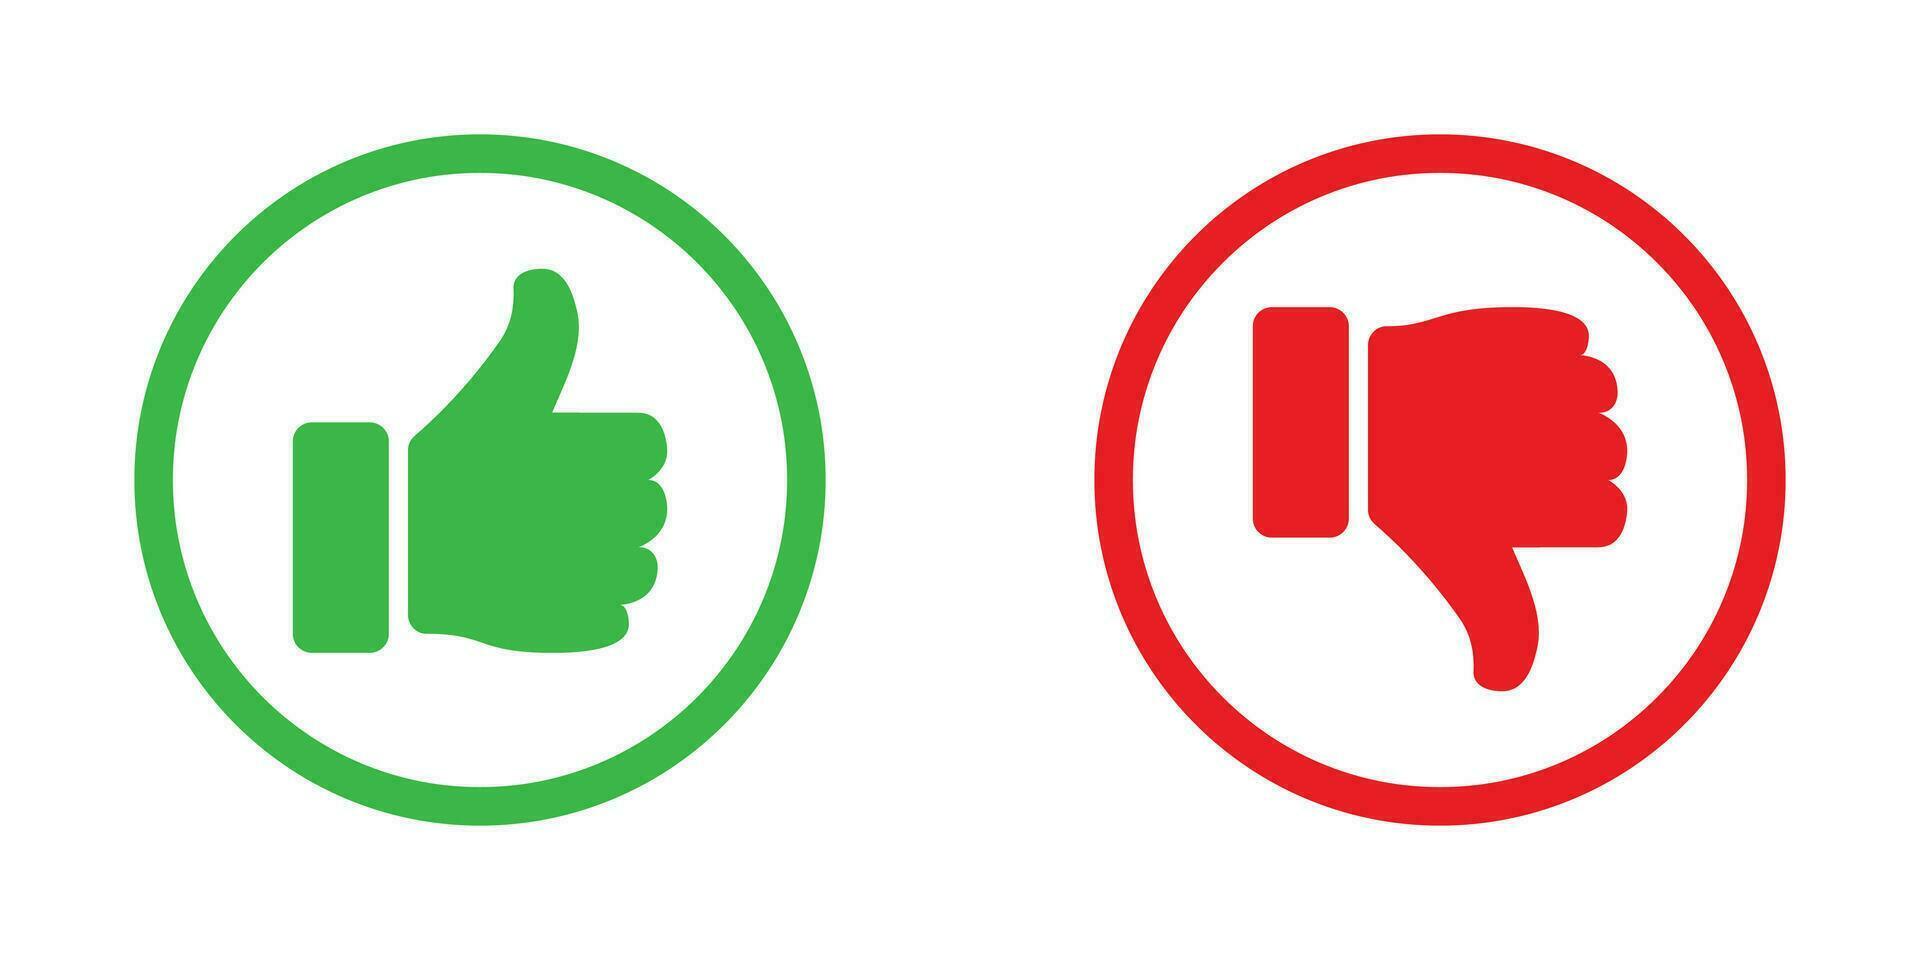 Thumbs Up Thumbs Down icon set vector